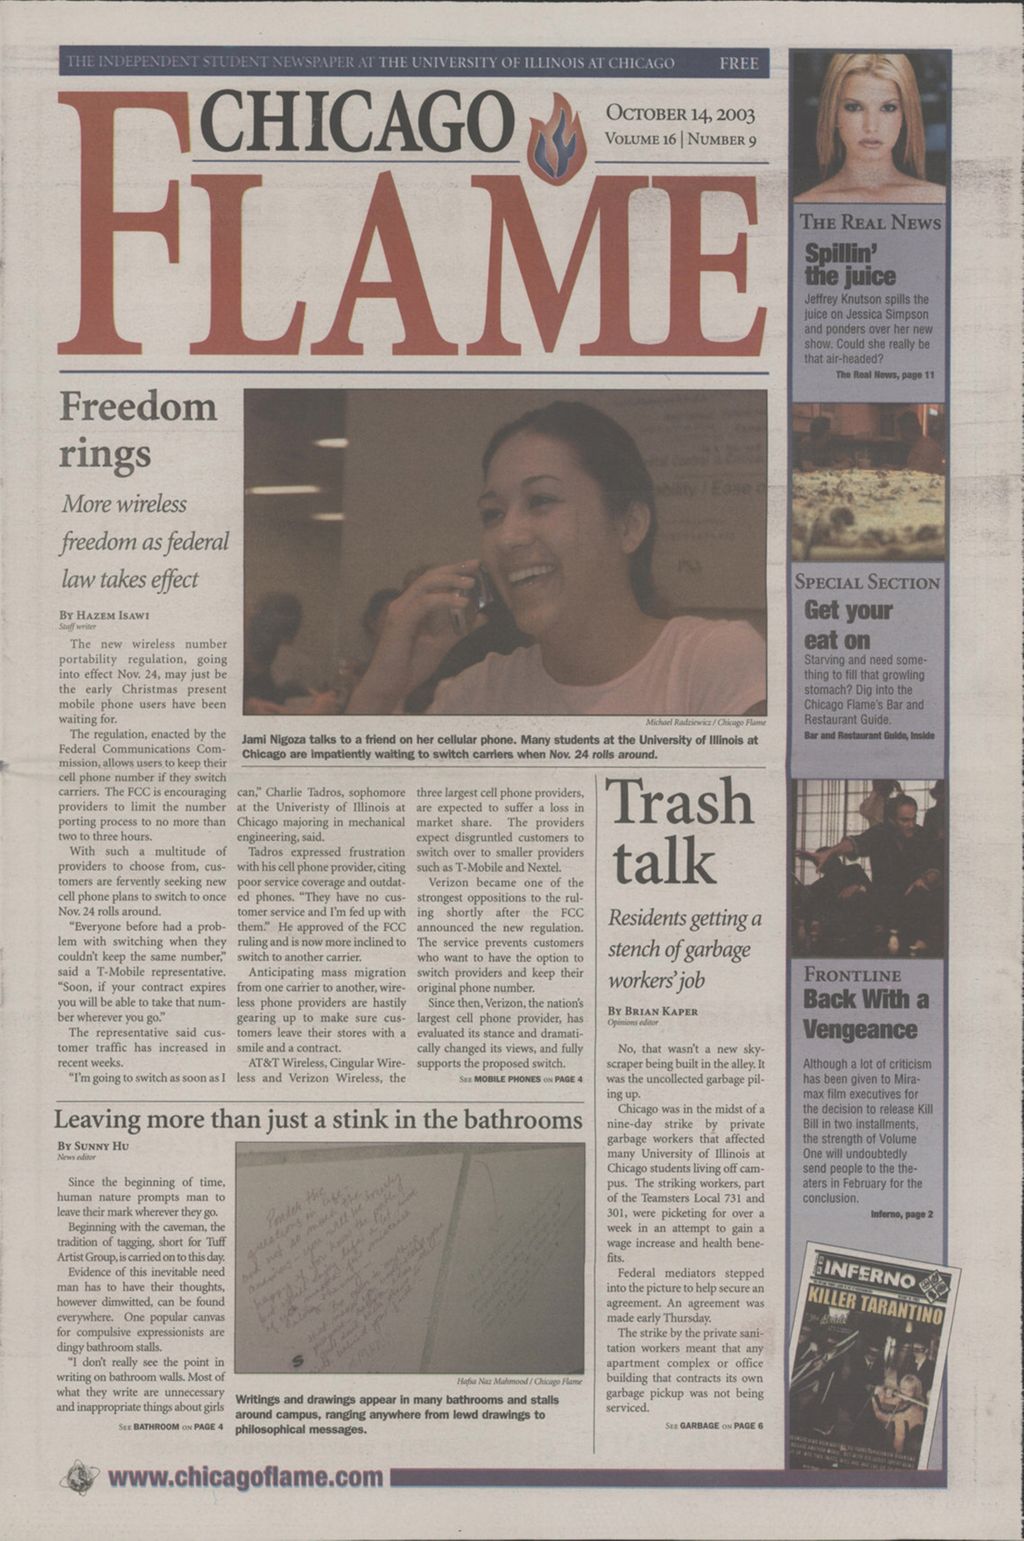 Miniature of Chicago Flame (October 14, 2003)